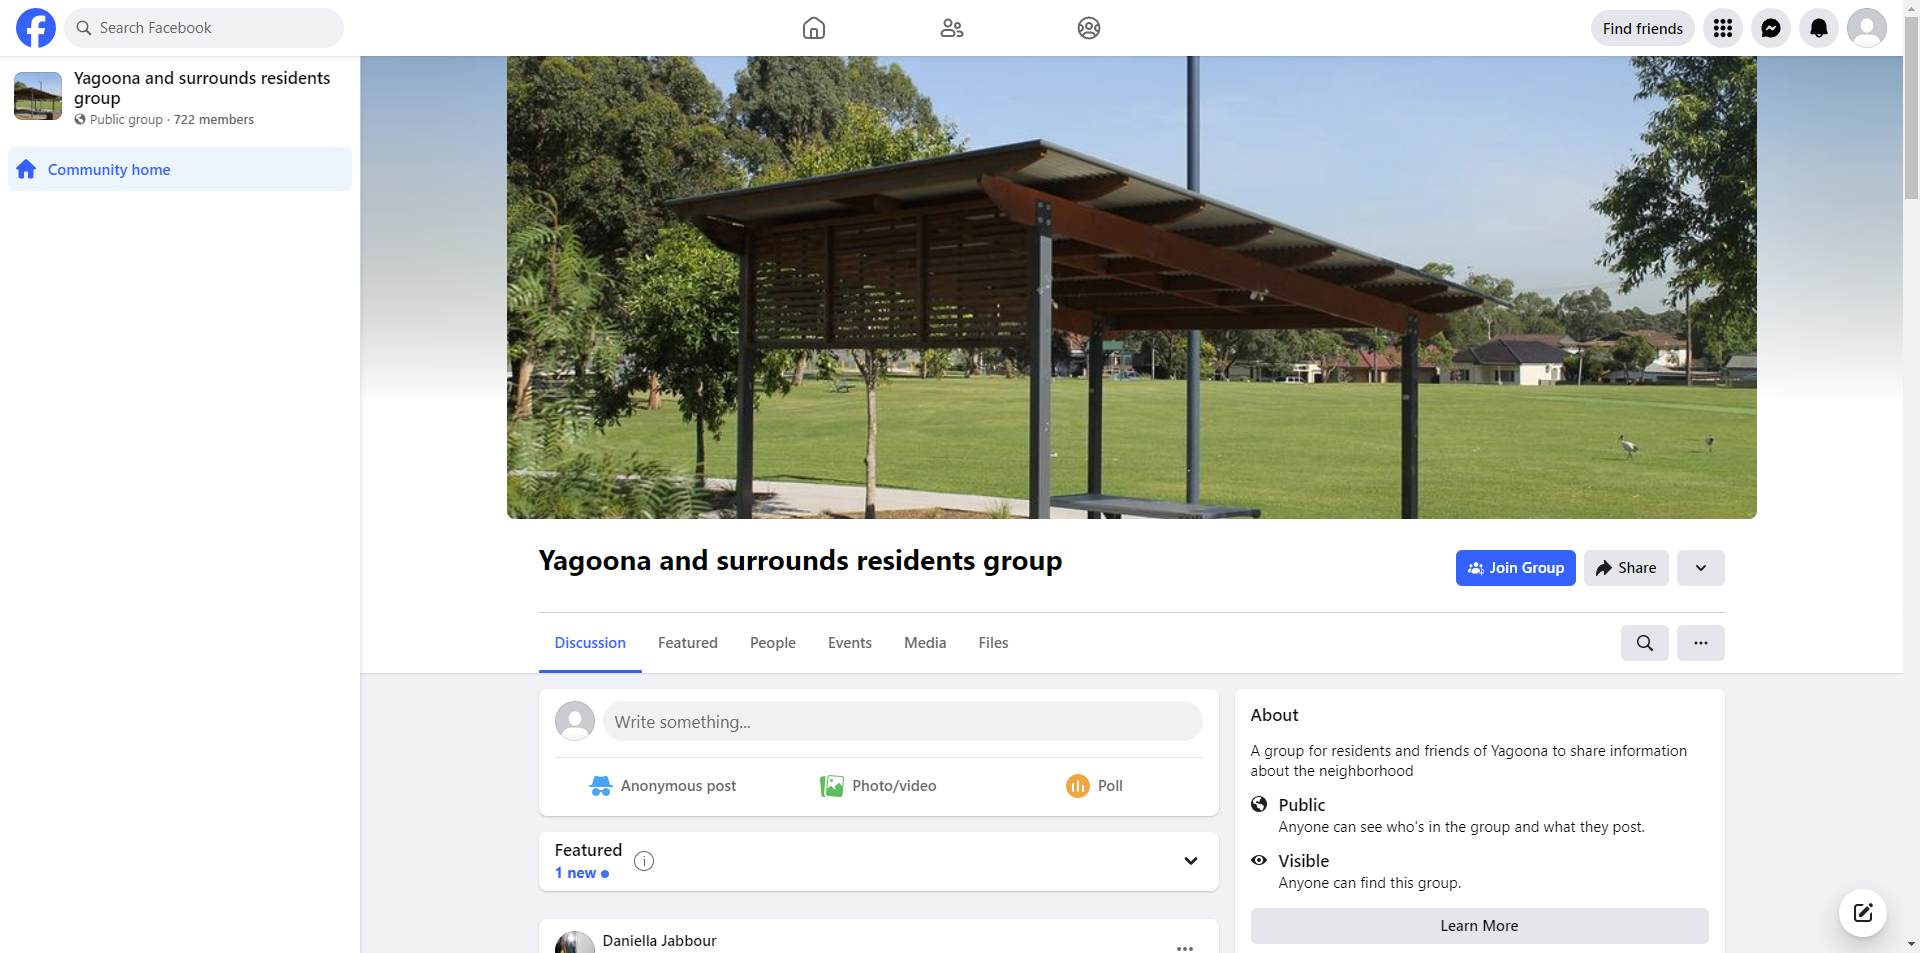 Yagoona and Surrounds Residents Group